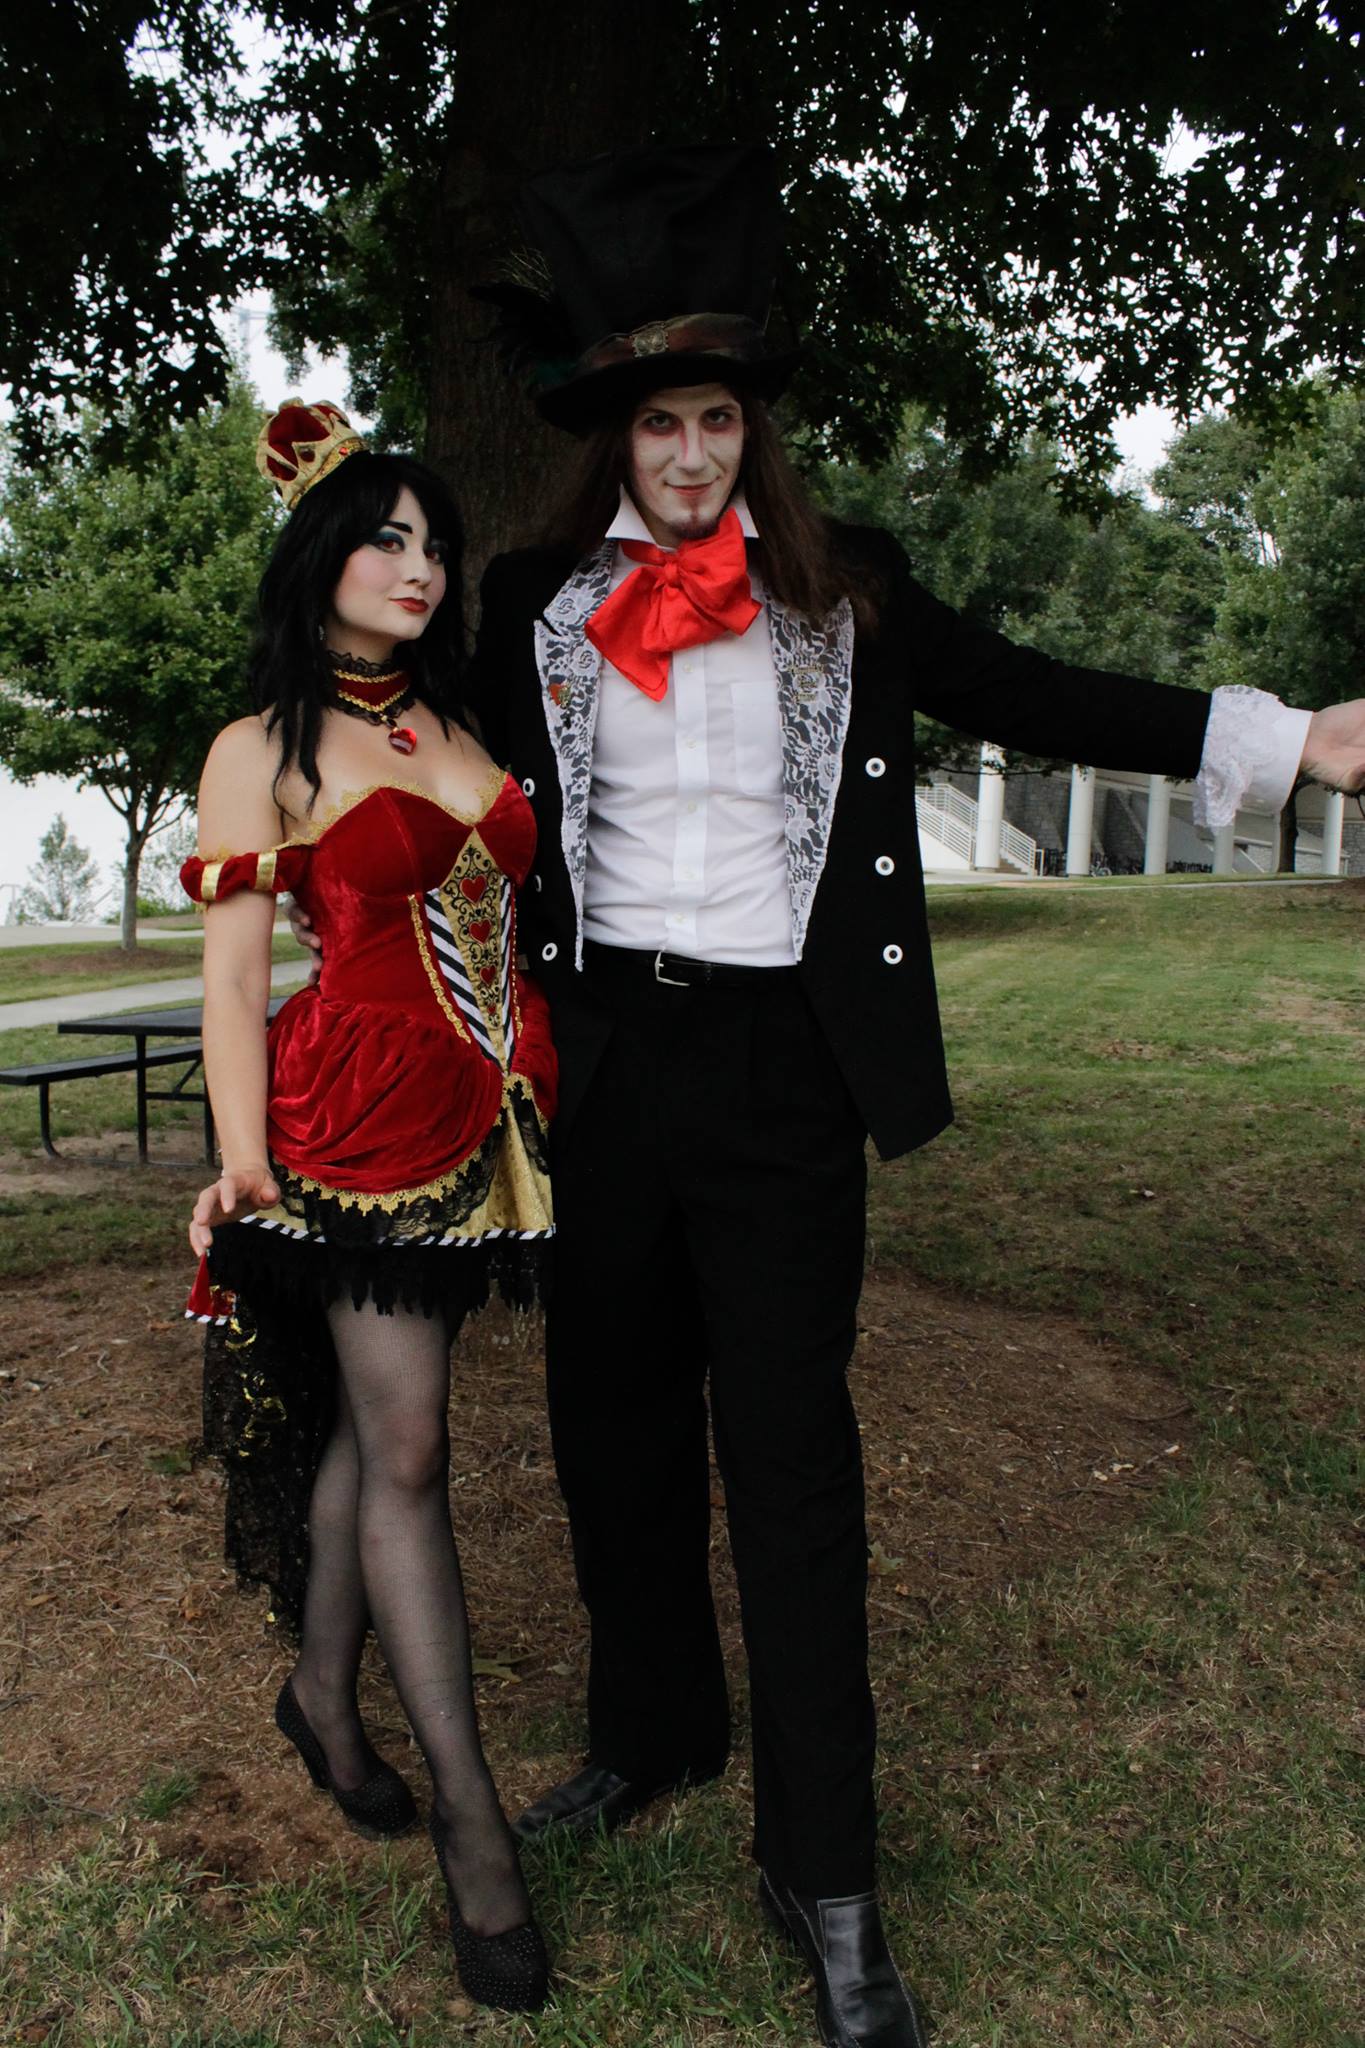 Mad Hatter with the Red Queen.